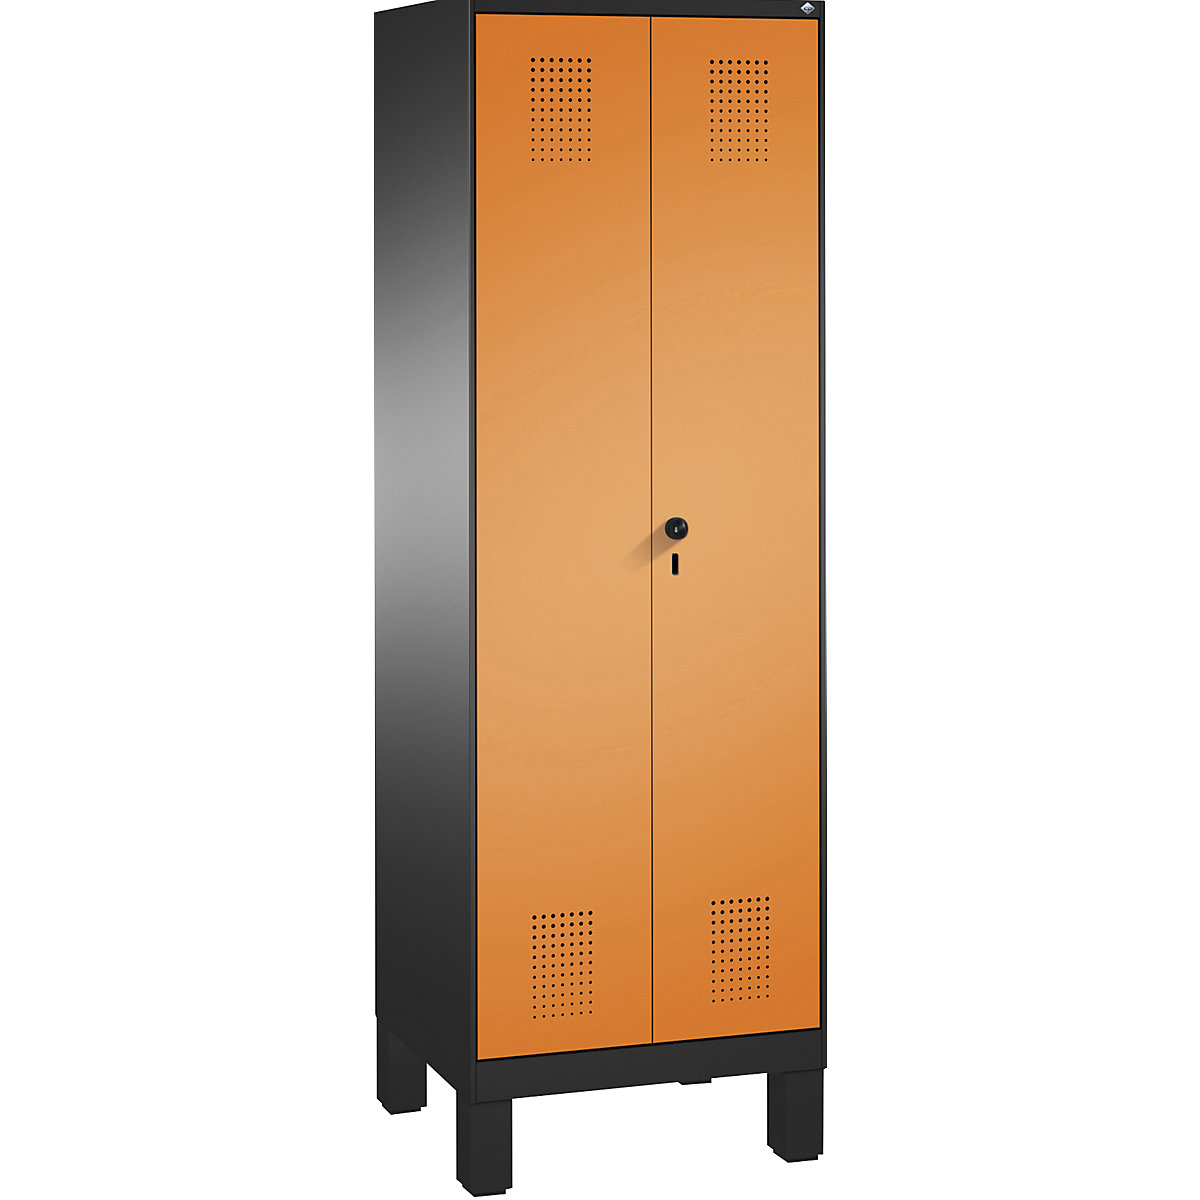 EVOLO storage cupboard, doors close in the middle, with feet – C+P, 2 compartments, 8 shelves, compartment width 300 mm, black grey / yellow orange